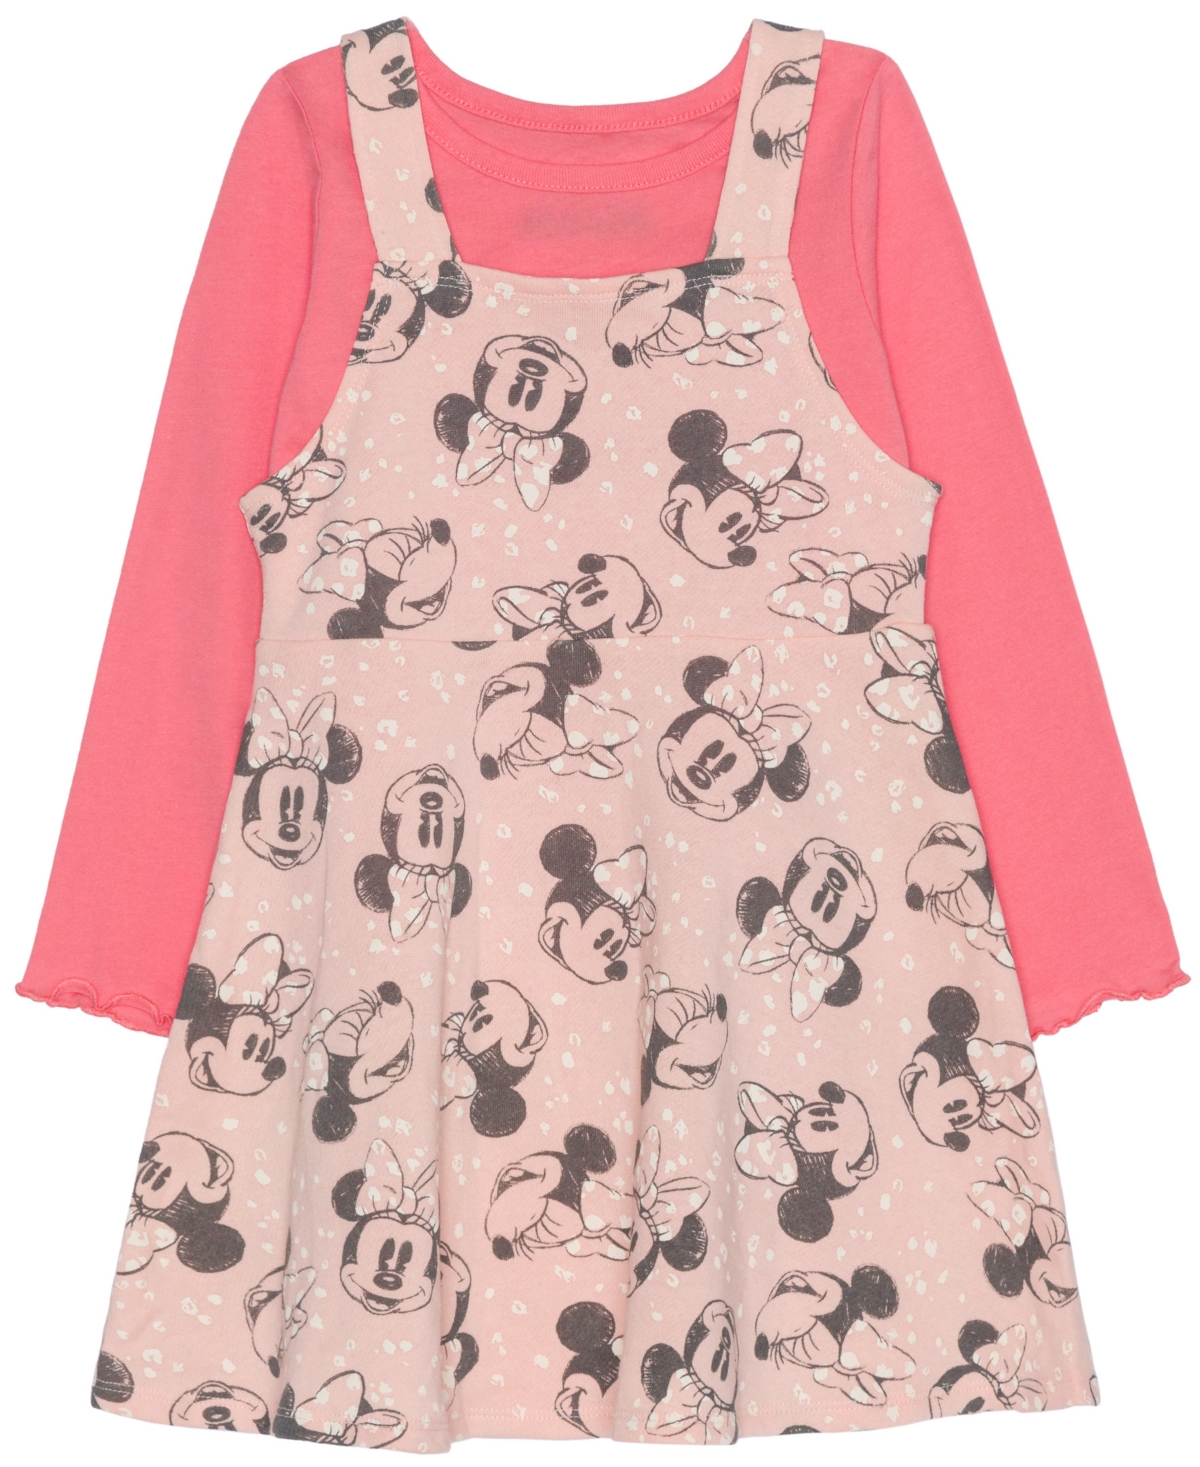 Disney Kids' Toddler Girls Long Sleeve Top With Dressall Minnie Mouse Dress Set In Pink